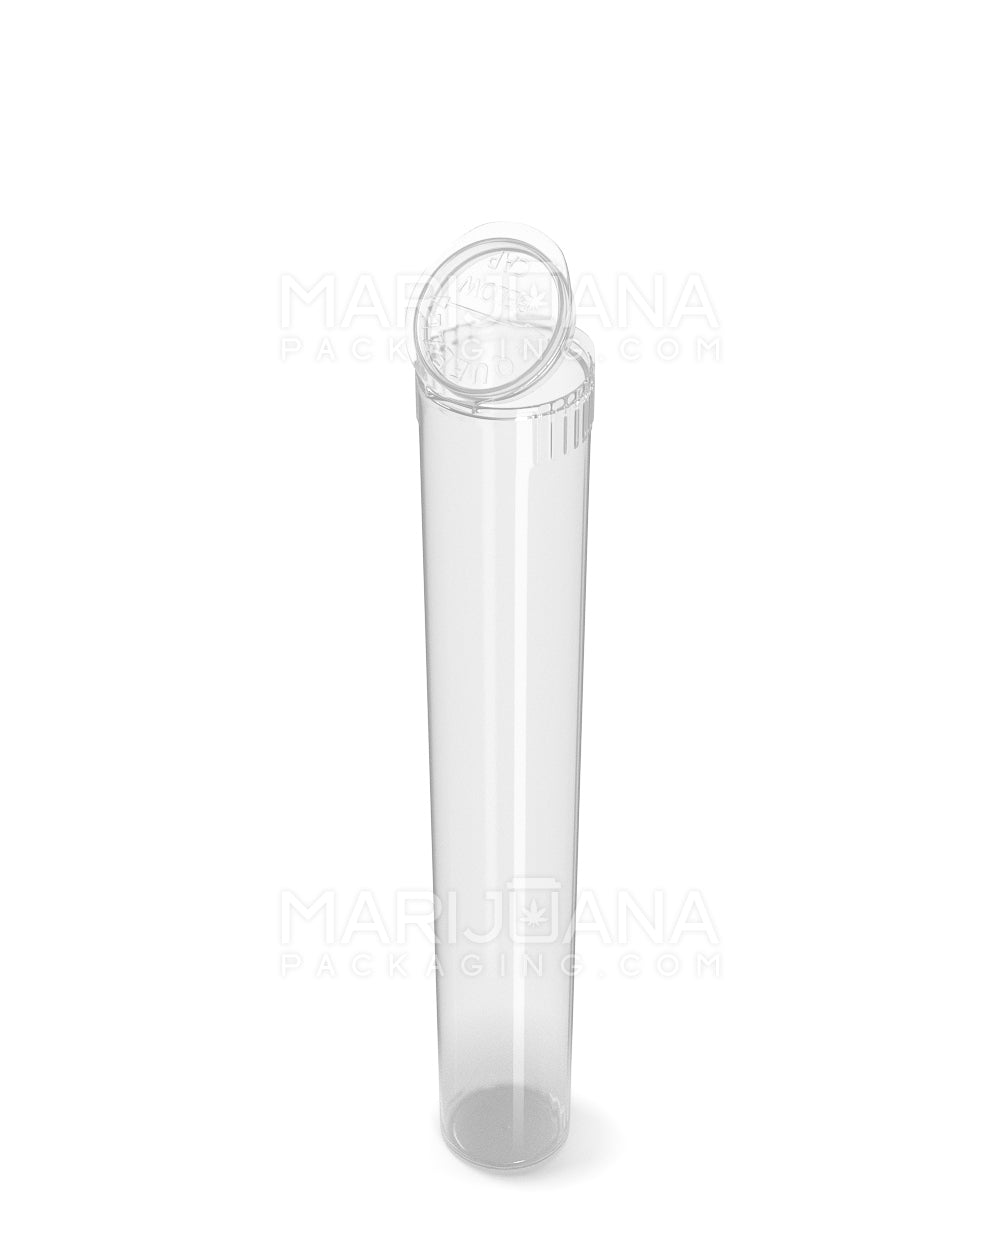 Child Resistant | King Size Pop Top Plastic PCR Pre-Roll Tubes (Open) | 116mm - Clear - 1000 Count - 3